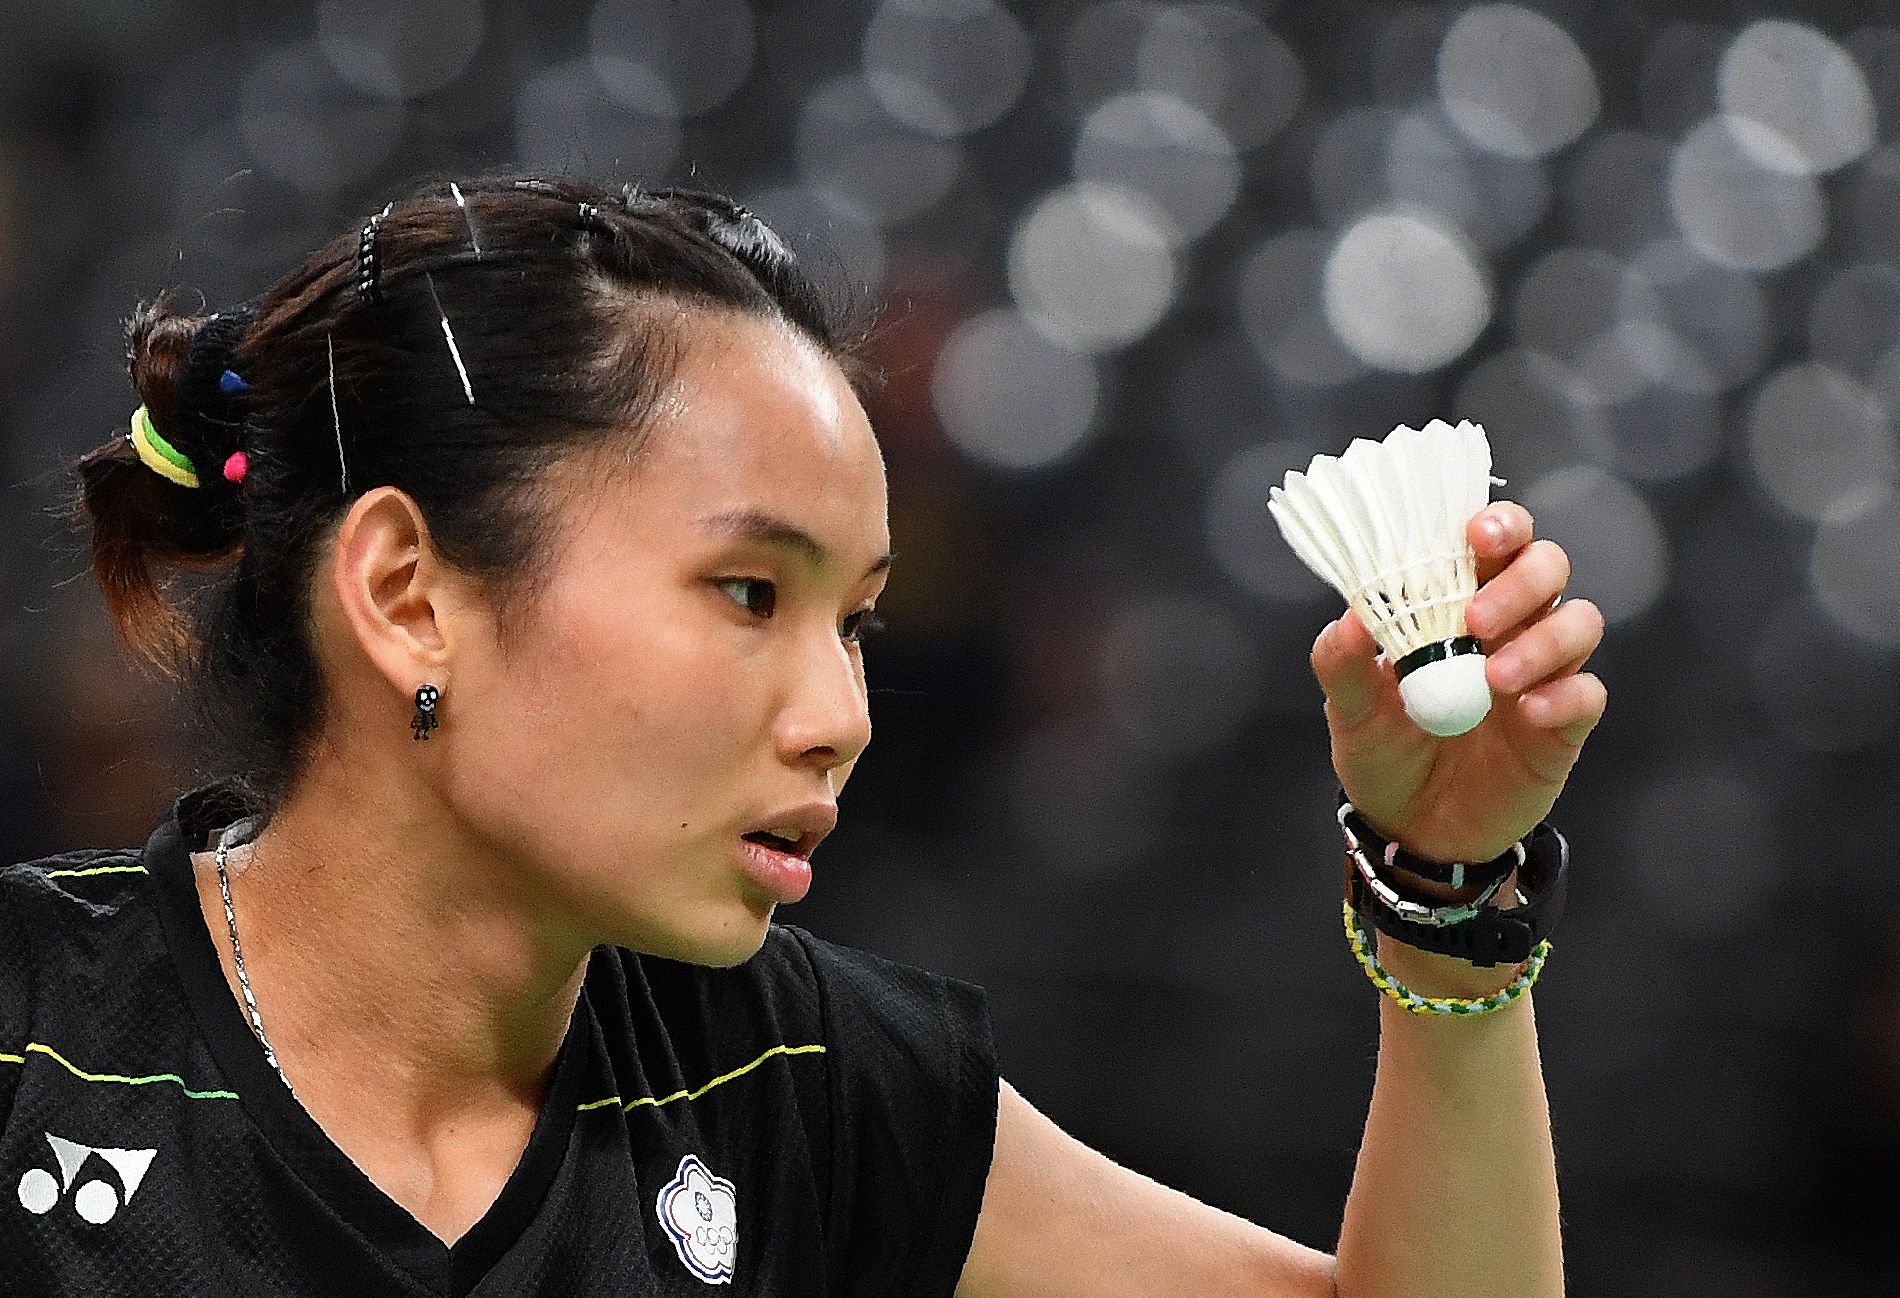 Olympics badminton live stream: Watch online - August 12th